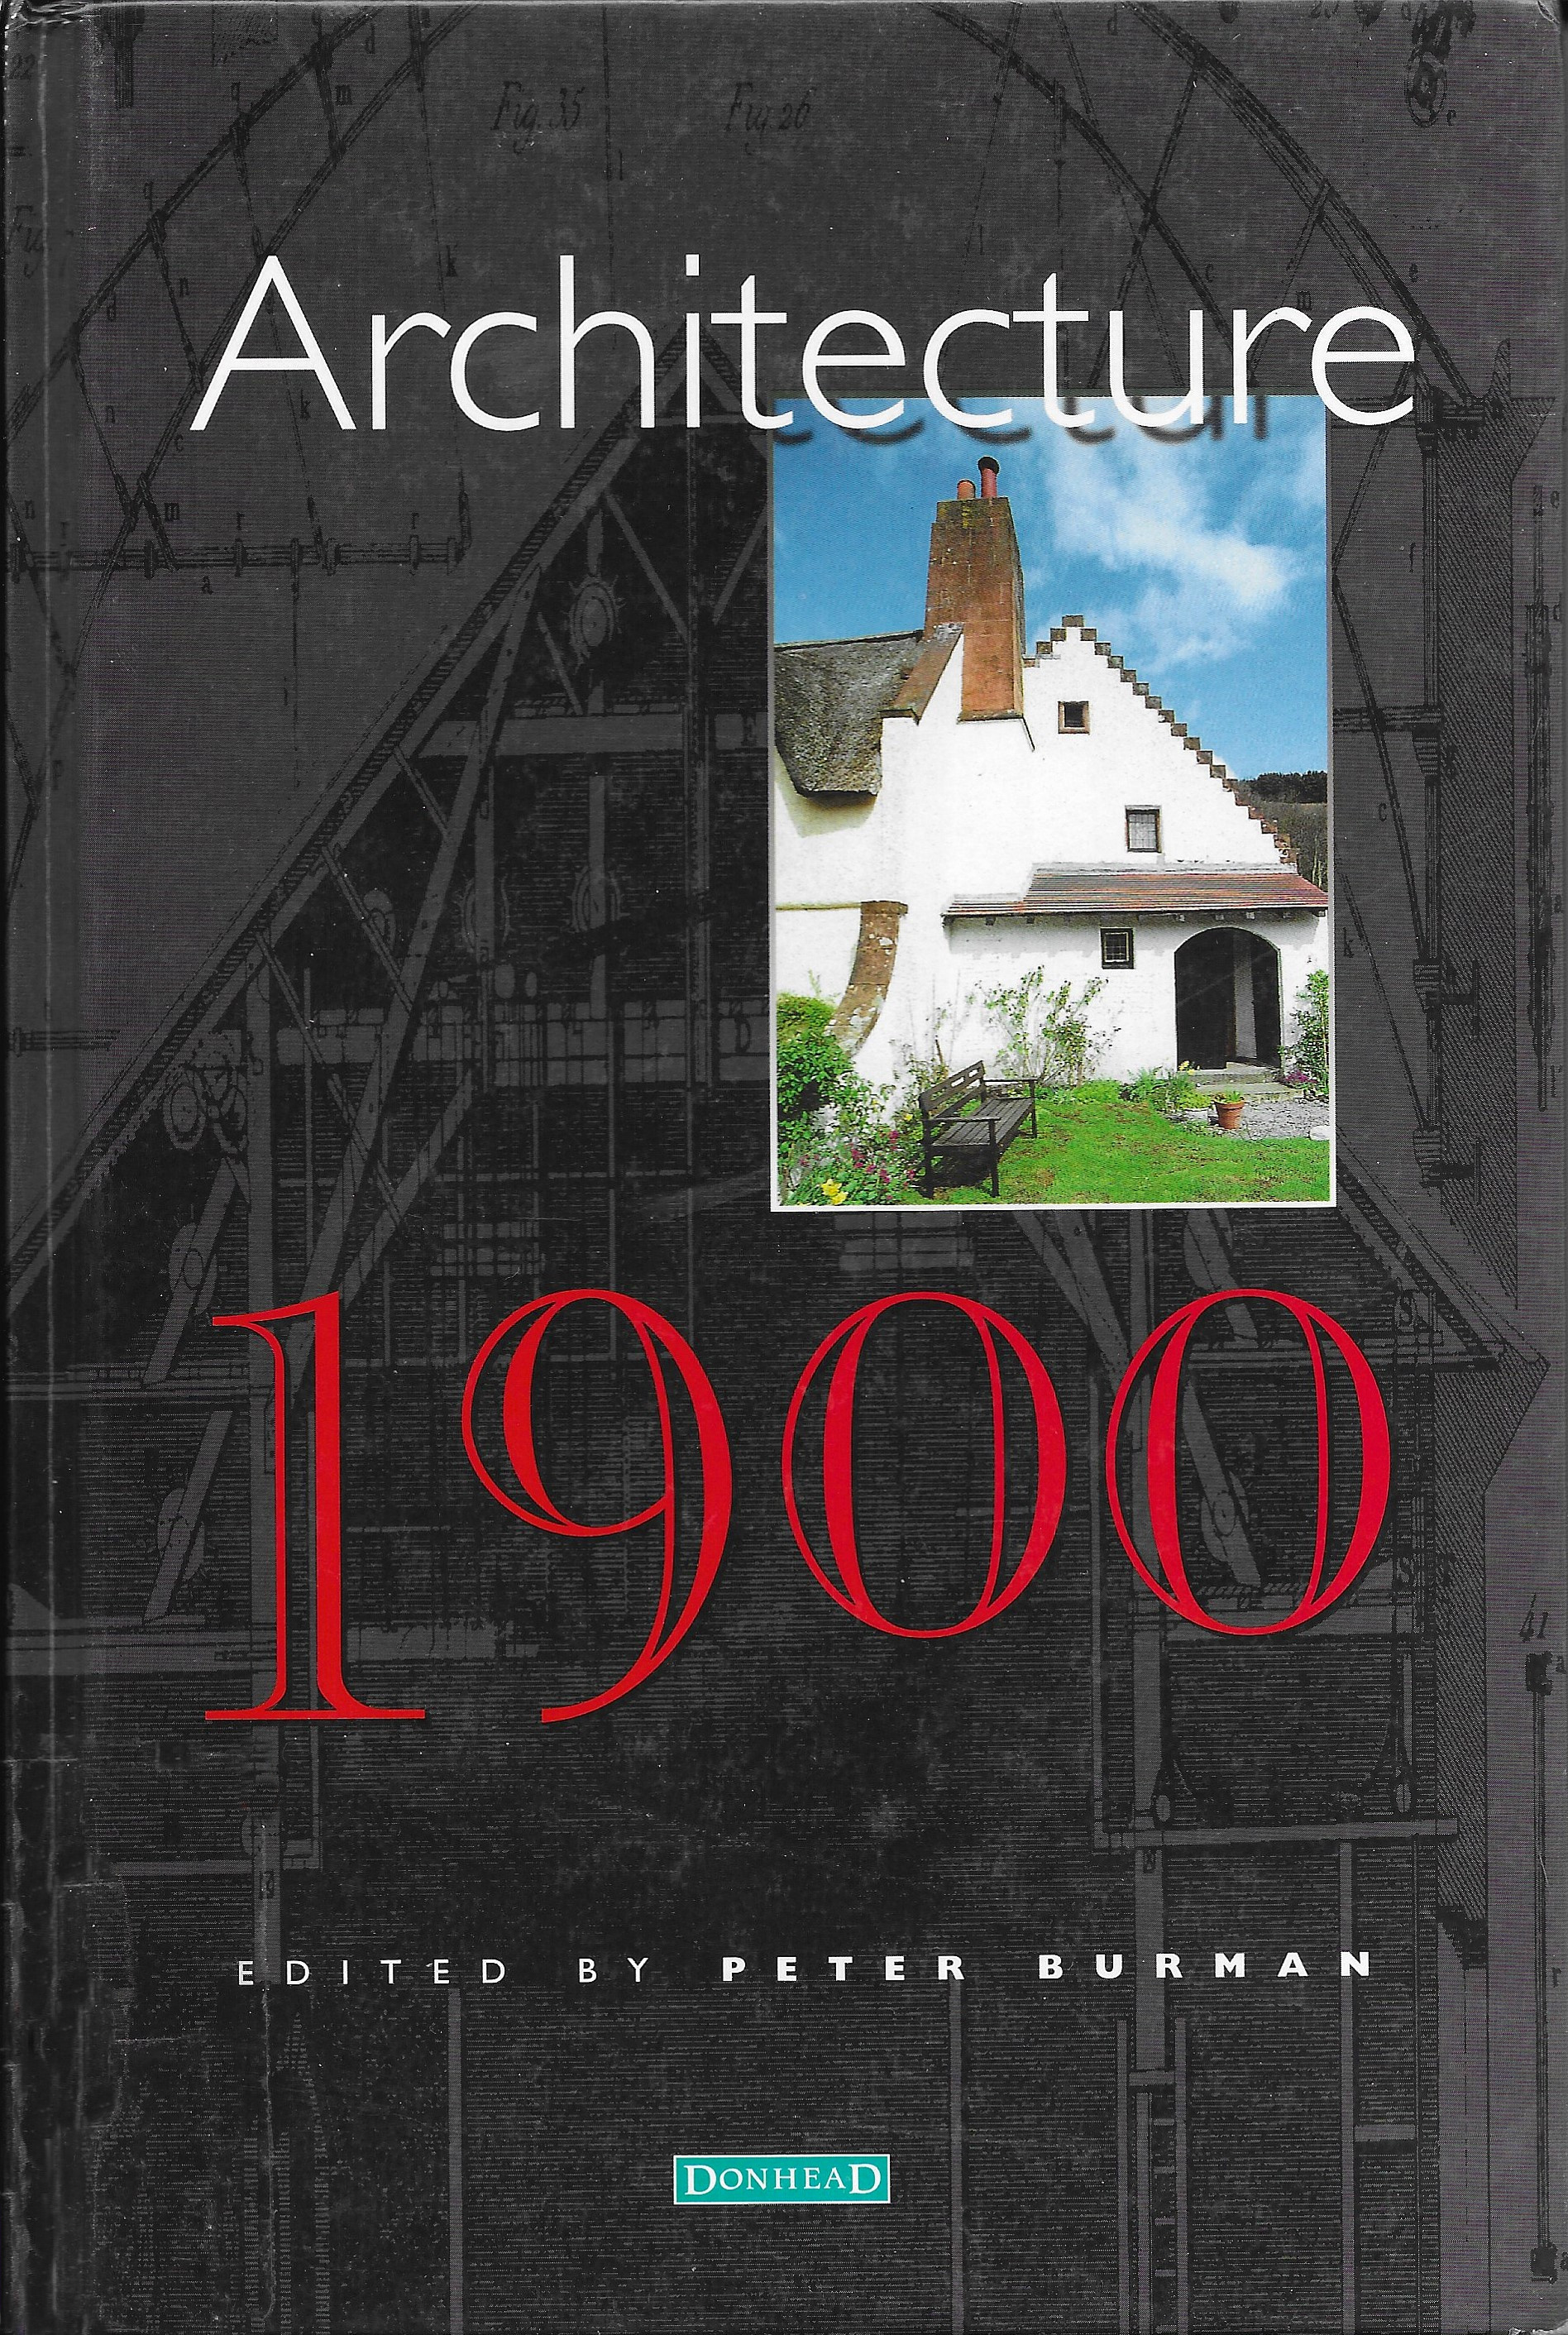 Cover of "Architecture 1900"